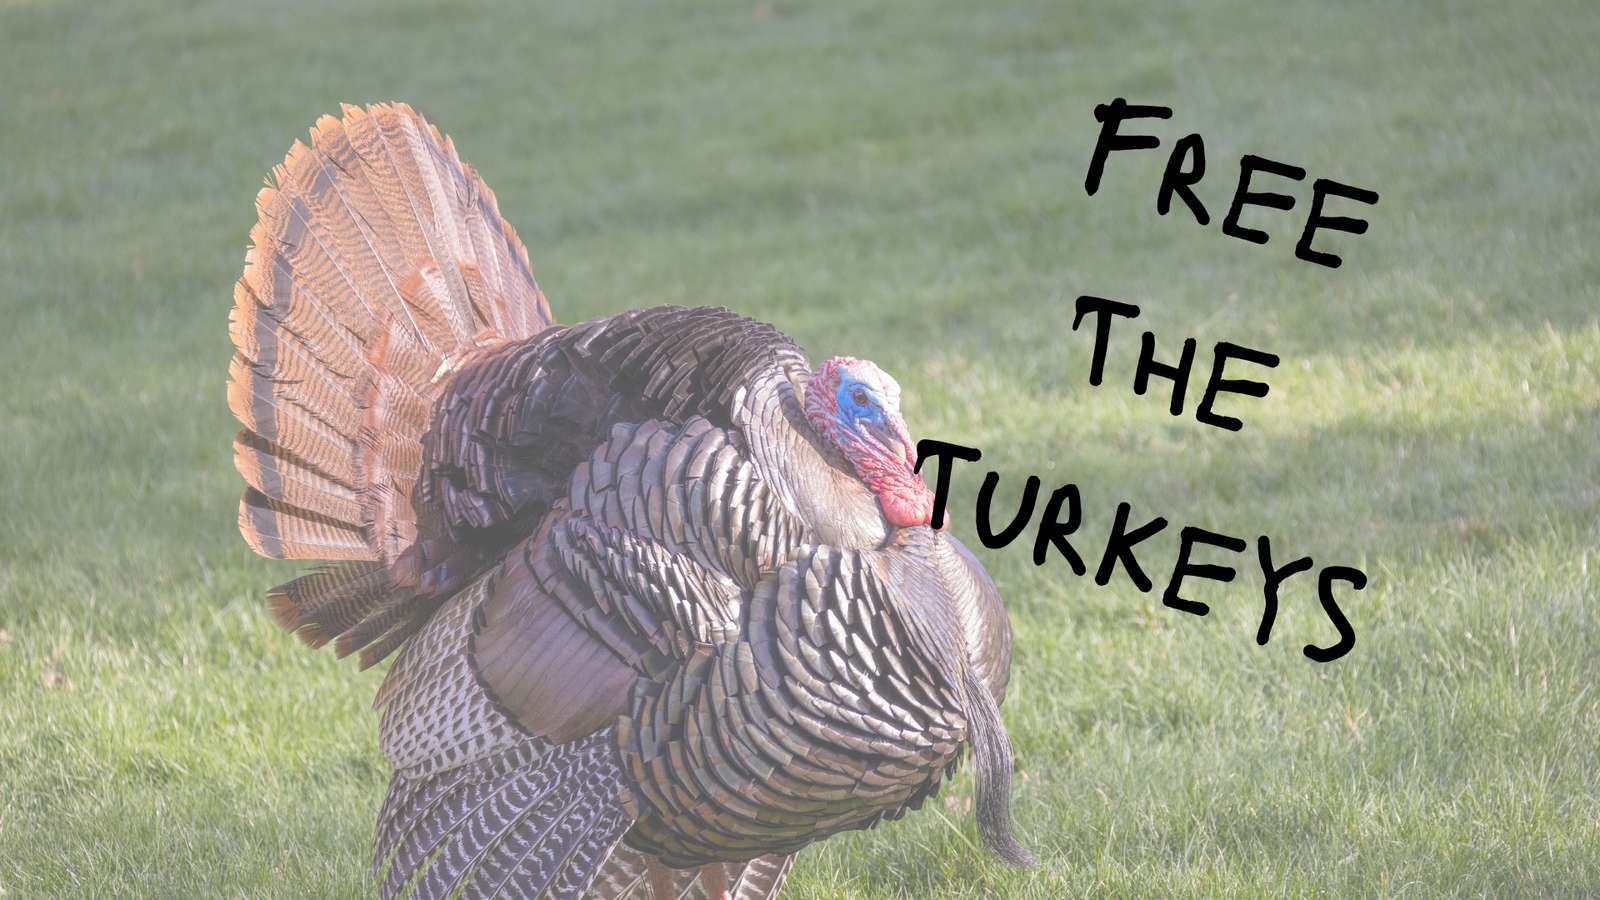 Turkeys Are Friends, Not Food puzzle online from photo